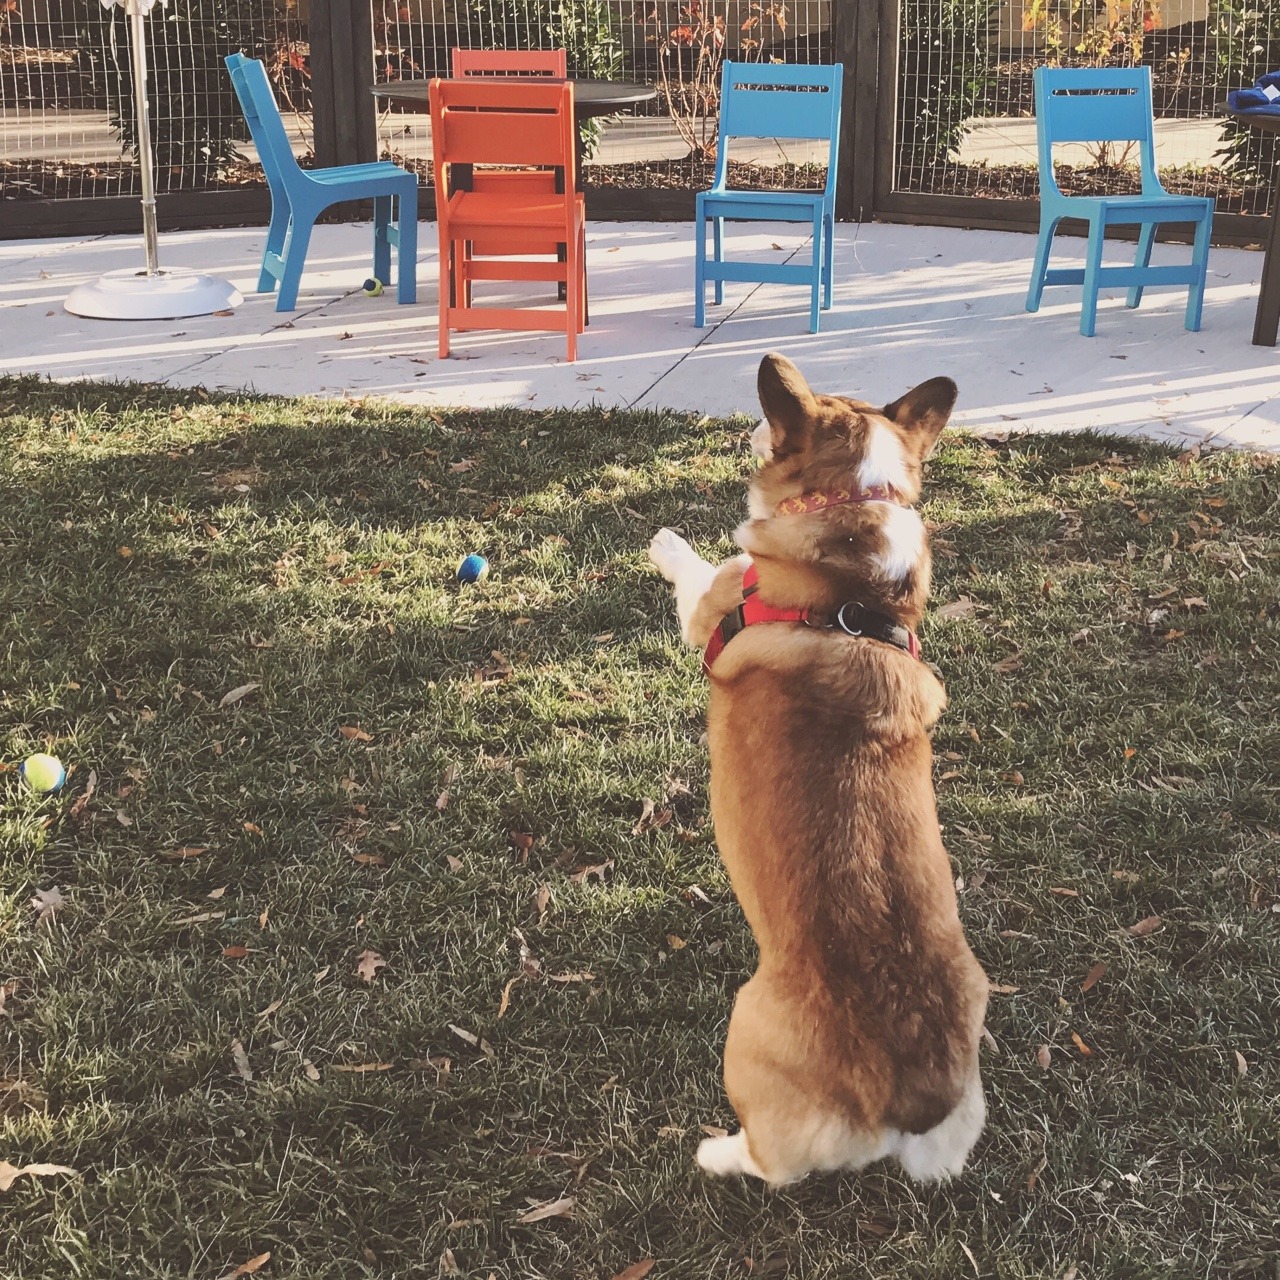 The ferocious corgi stands on his hind legs like a bear to scare off his enemies.
Rawr.